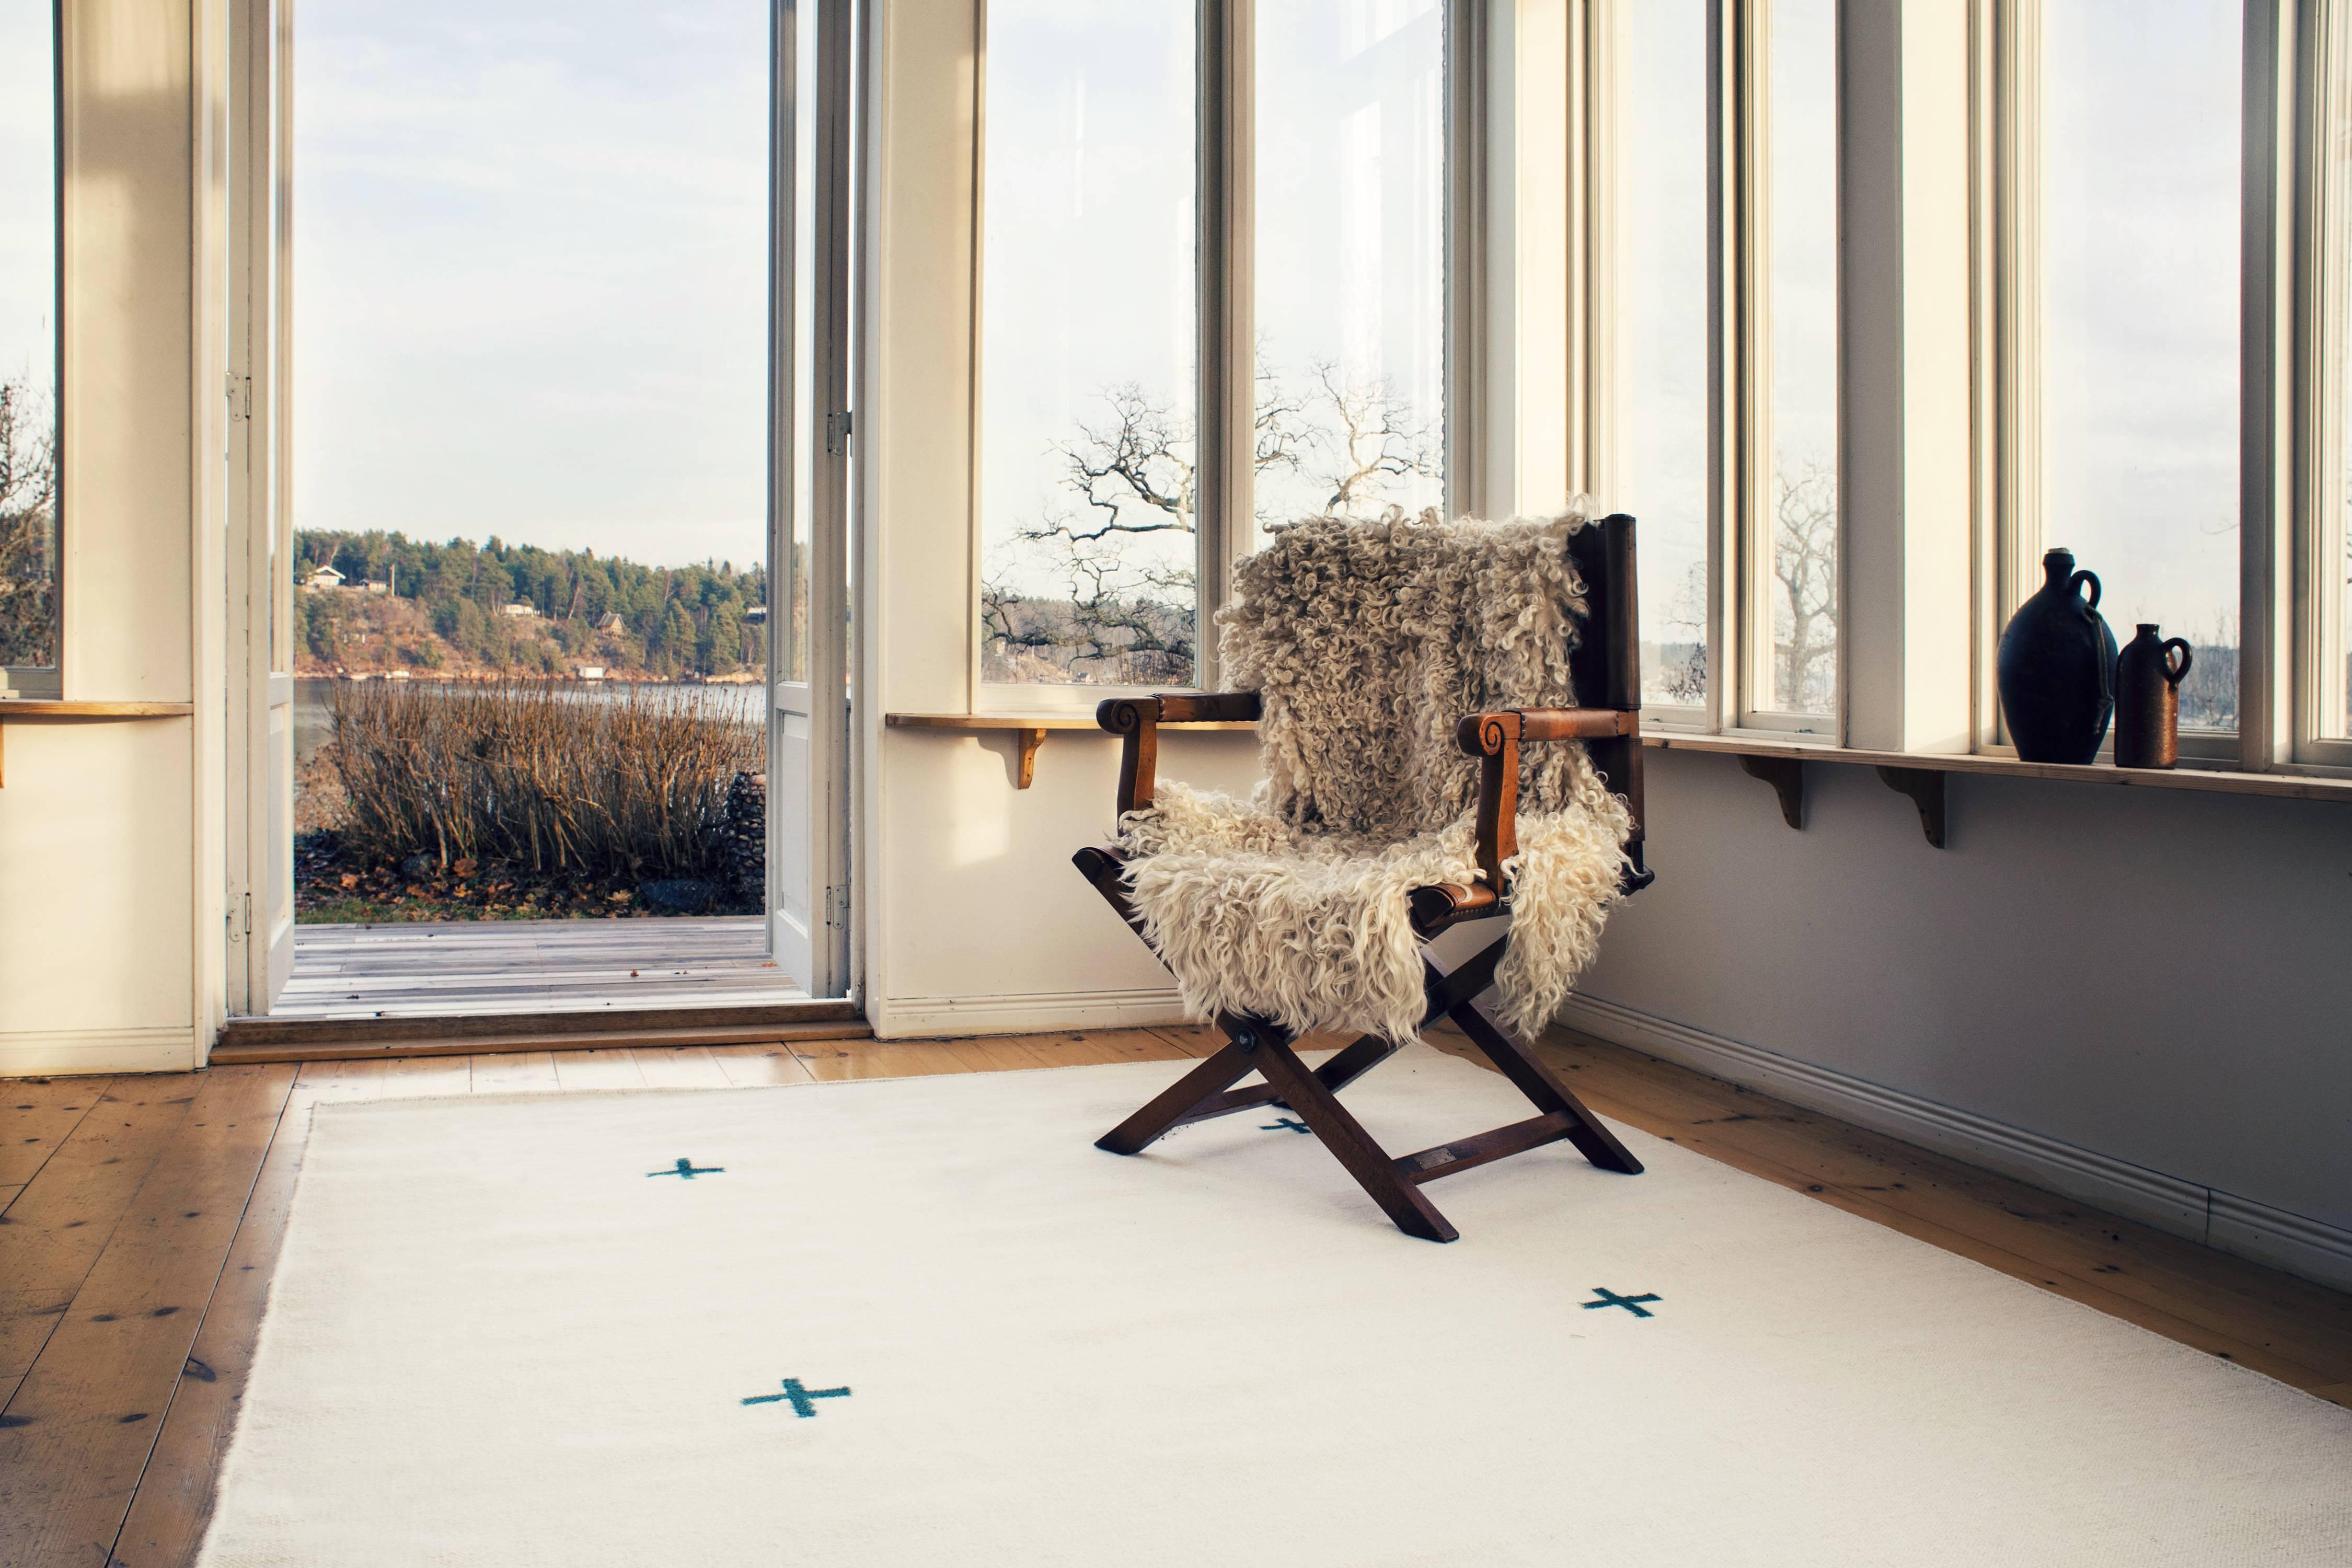 Plus Cream/Green is a modern dhurrie/kilim rug in Scandinavian design. It is available in different sizes - see customization options below.
This contemporary design has a minimalist aesthetic with an artistic touch. A great complement to the rest